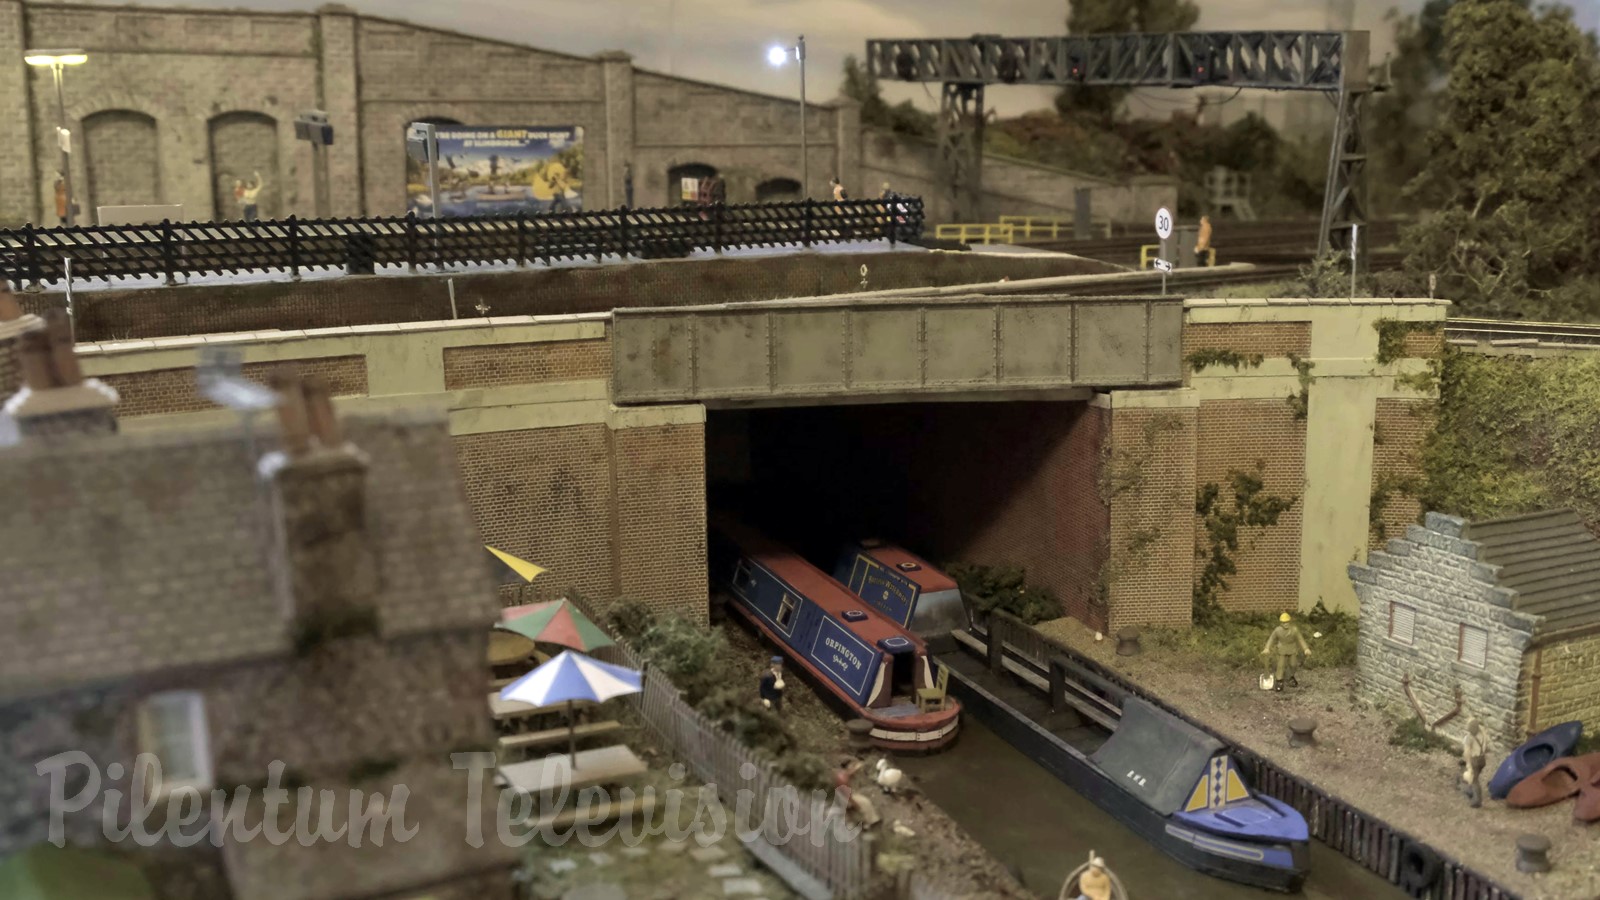 British Railway Modelling - Hornby and Bachmann Model Trains UK - OO Gauge Running Session